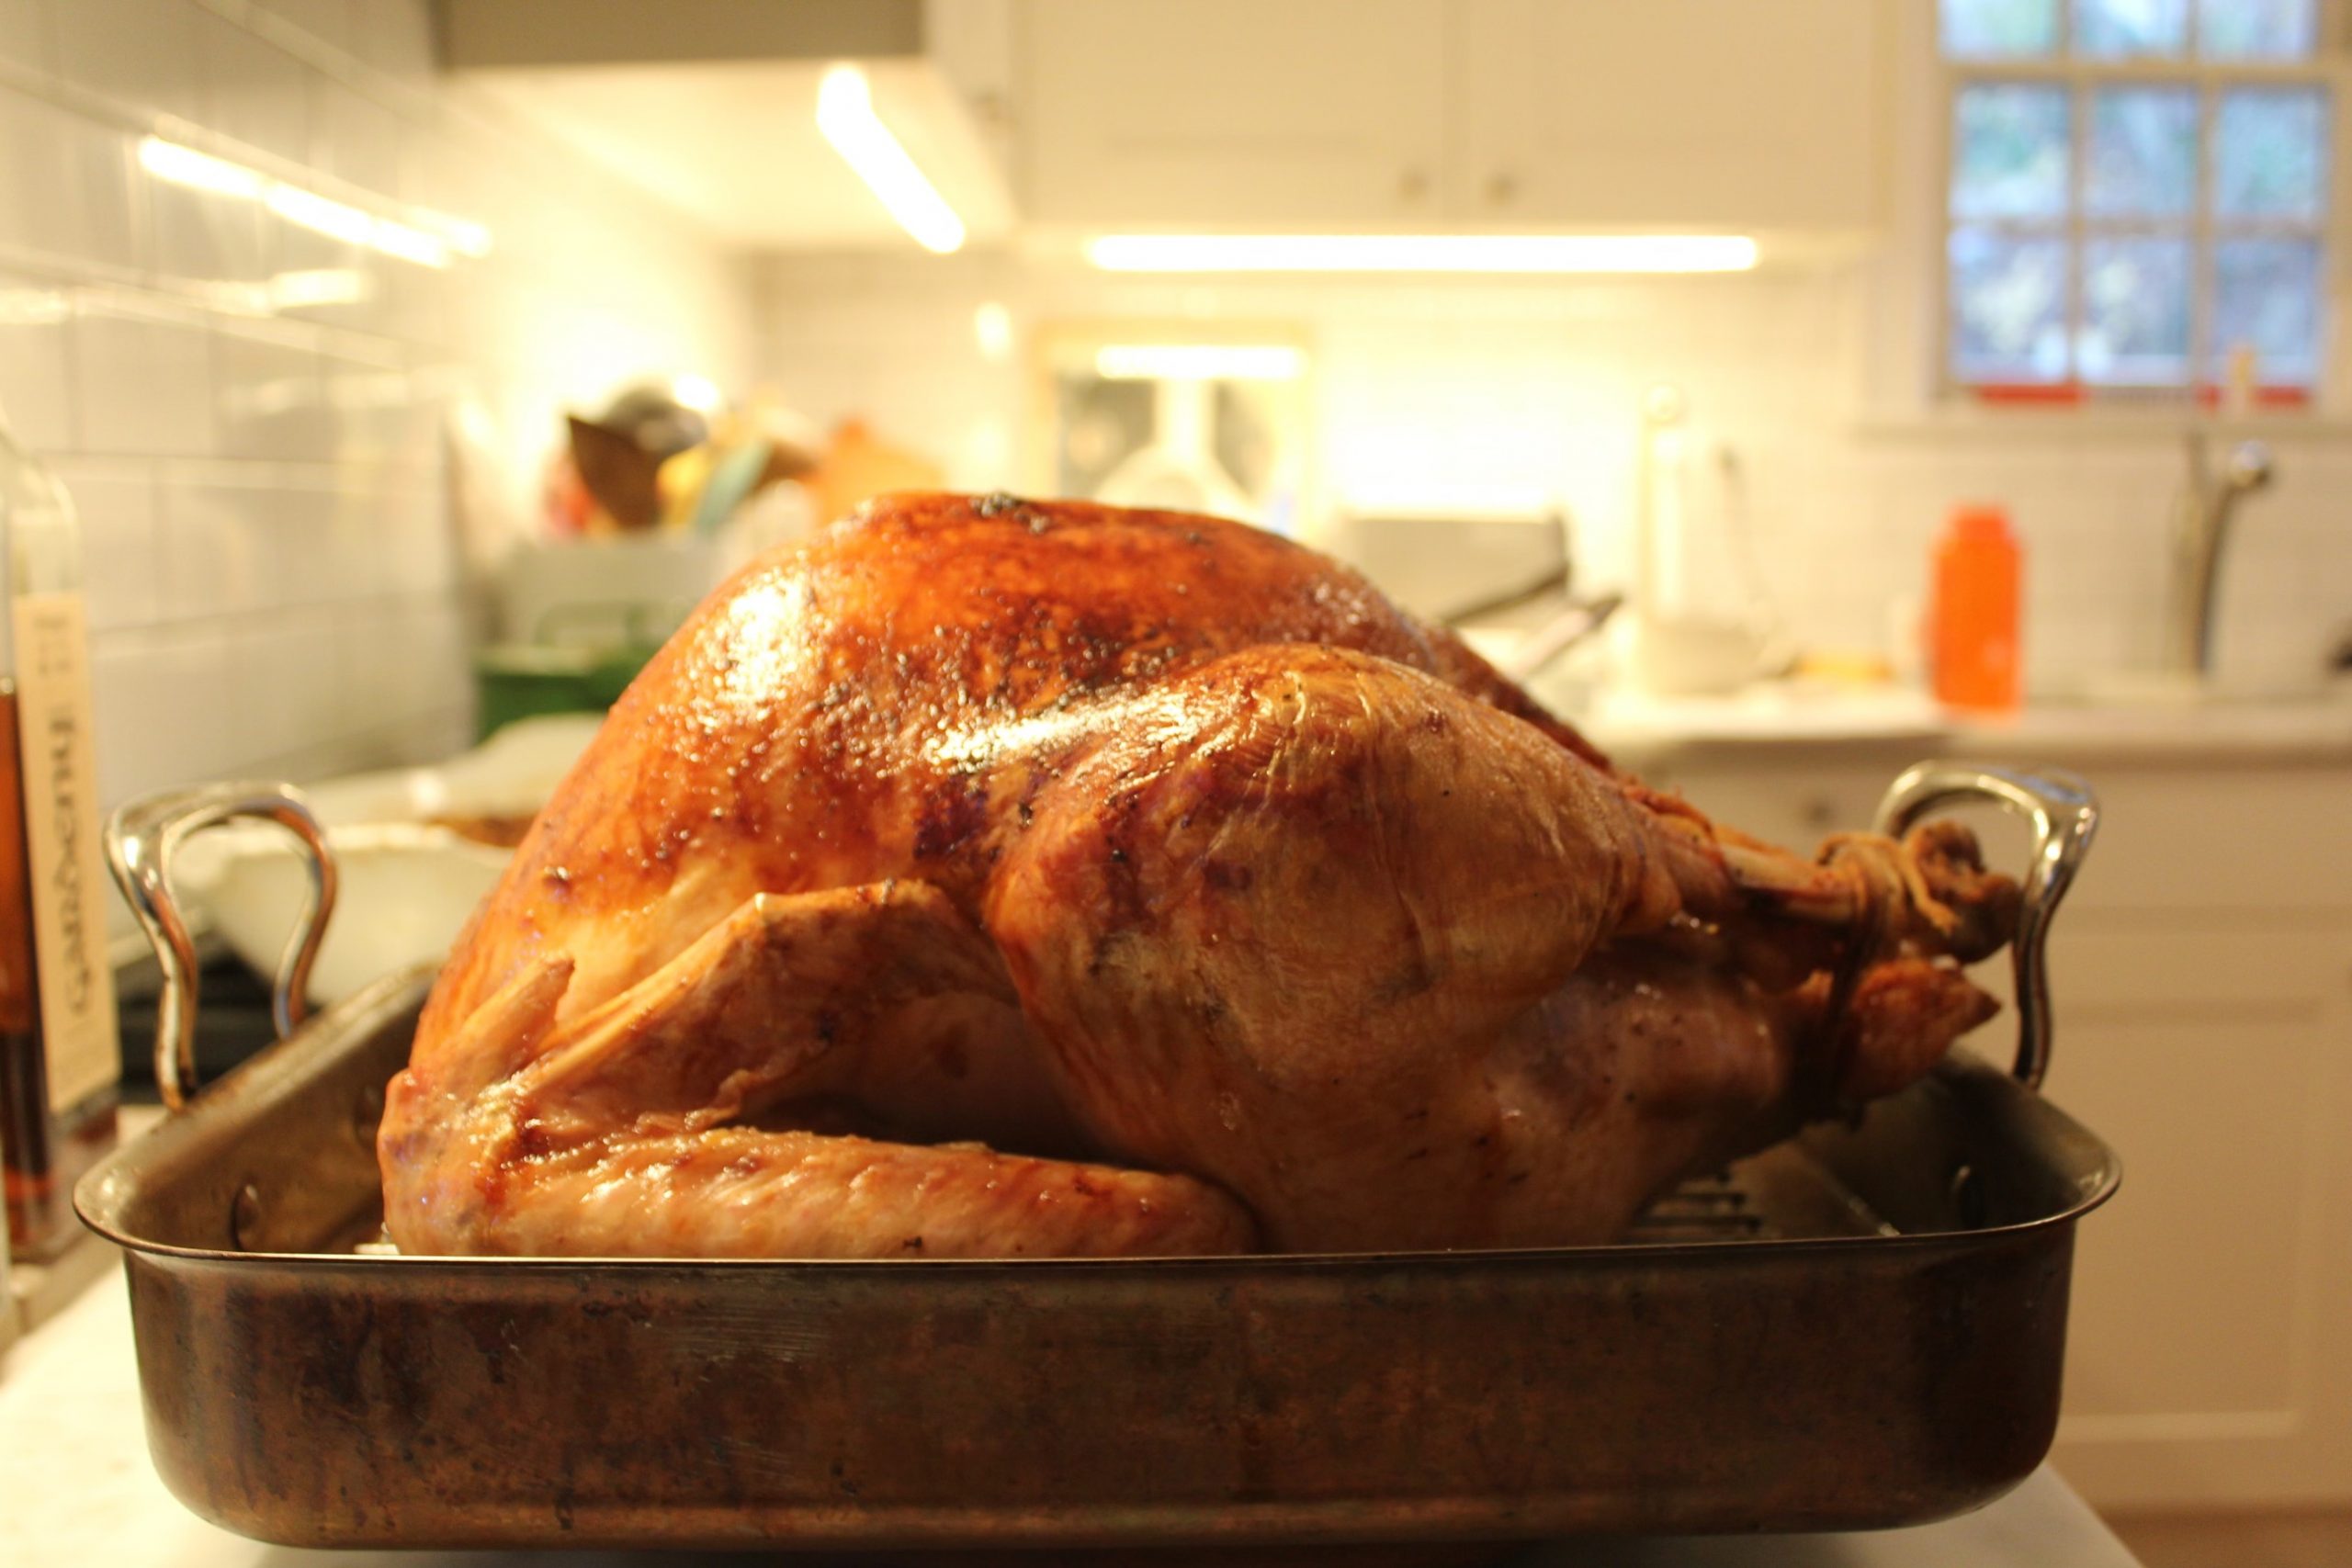 Roasted Turkey in Parchment With Gravy Recipe (With Video)